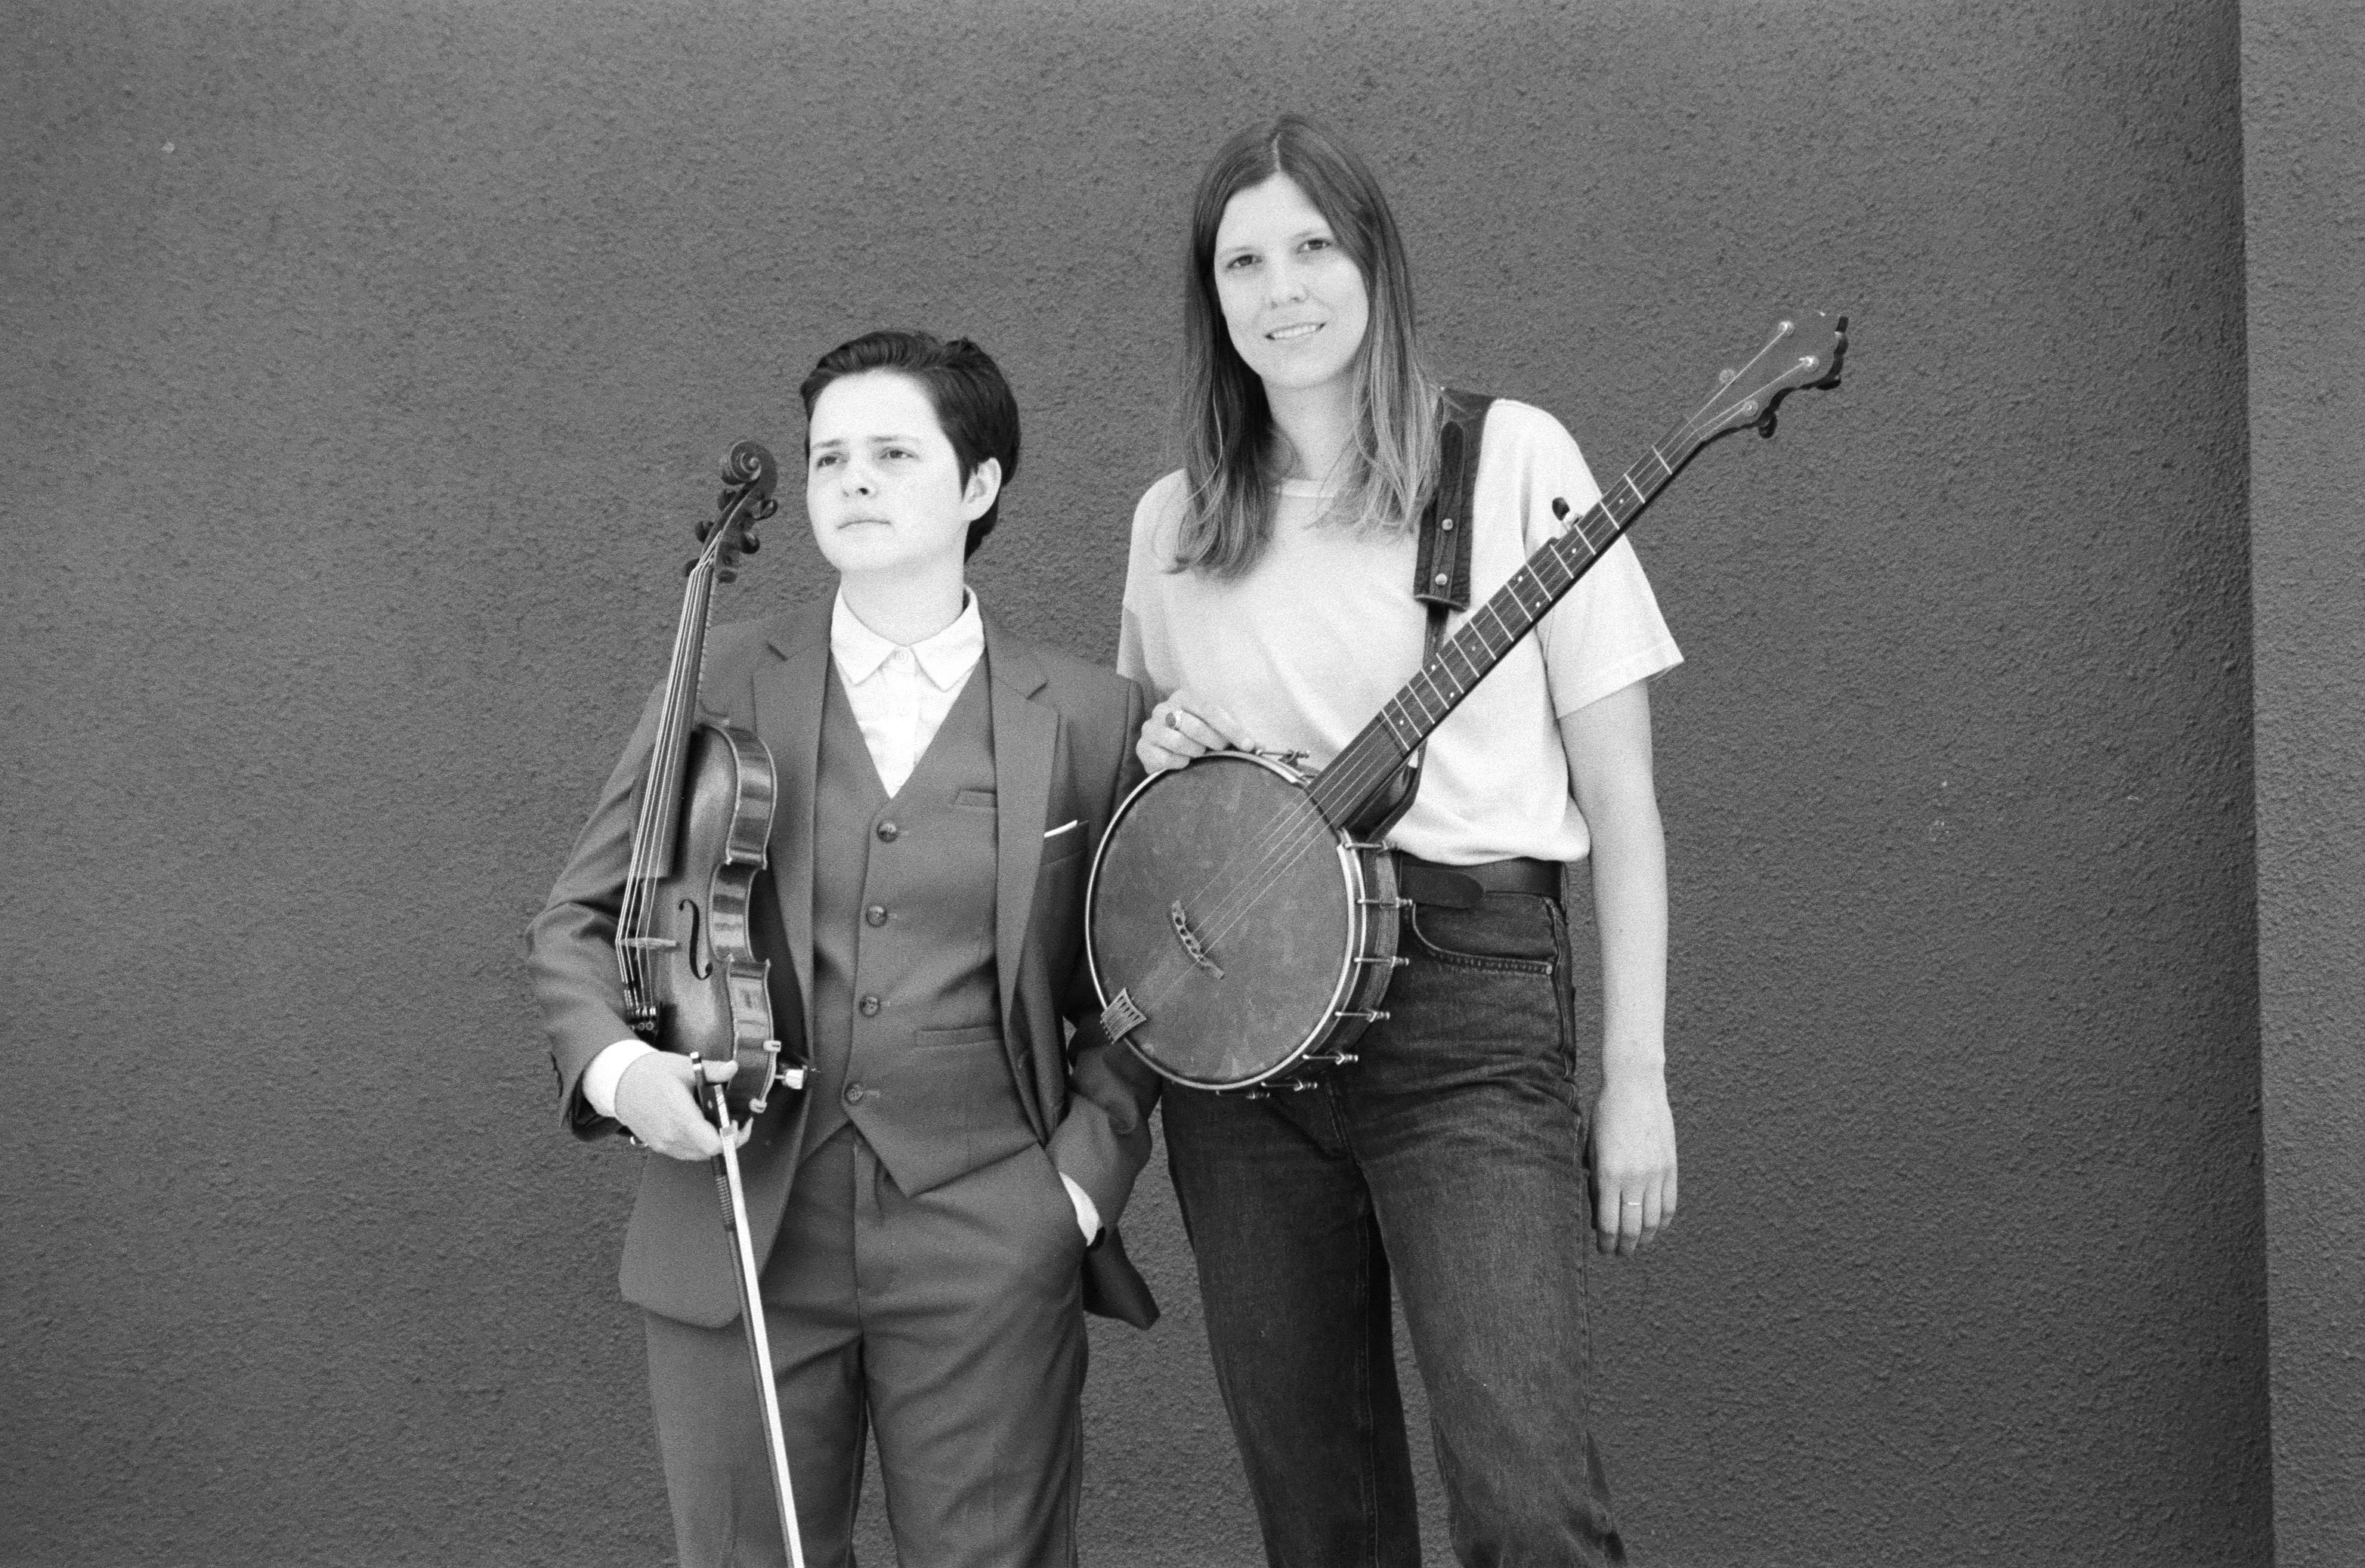 Allison de Groot & Tatiana Hargreaves release EP of Outtakes from acclaimed Free Dirt album